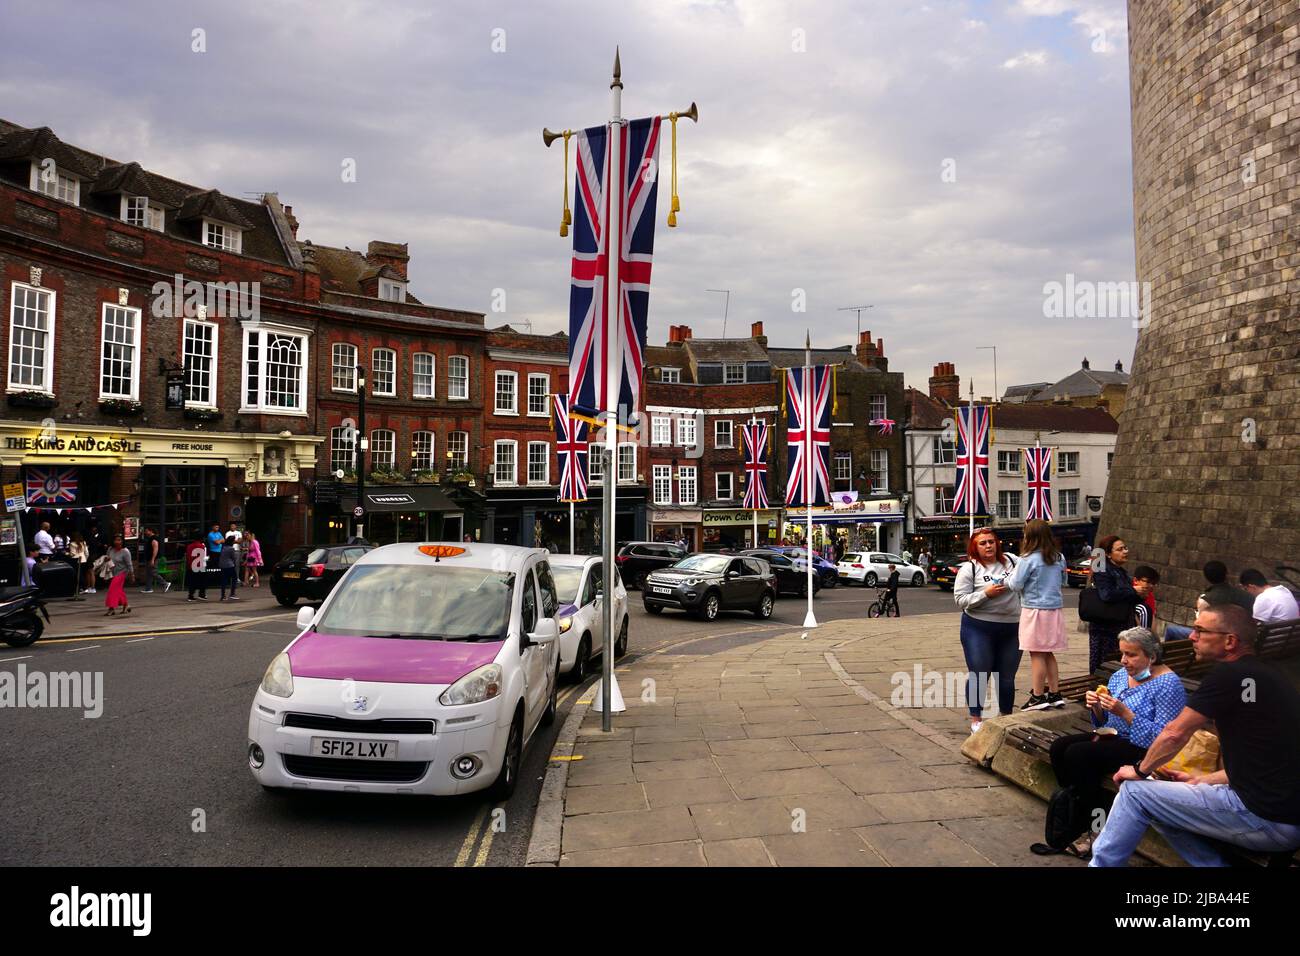 The Queen’s Jubilee in the Town of Windsor, London, United Kingdom Stock Photo